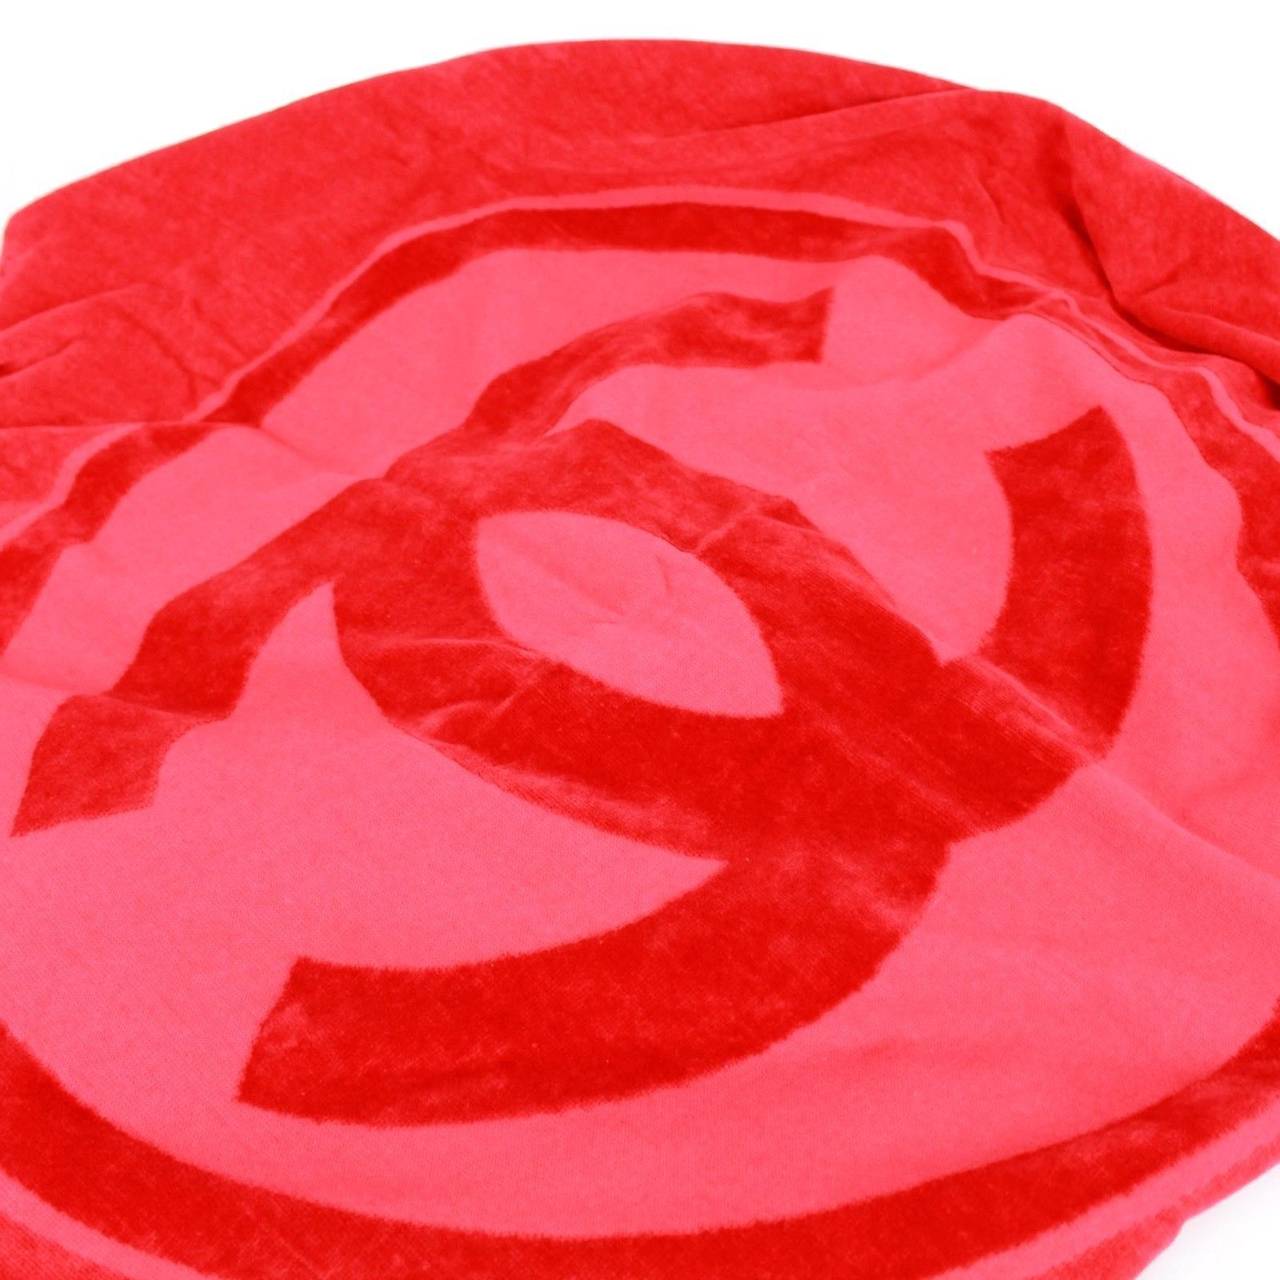 Chanel Candy Red Quilted 100% Cotton 2015 Cc Logo Beach Towel Bag For Sale 2